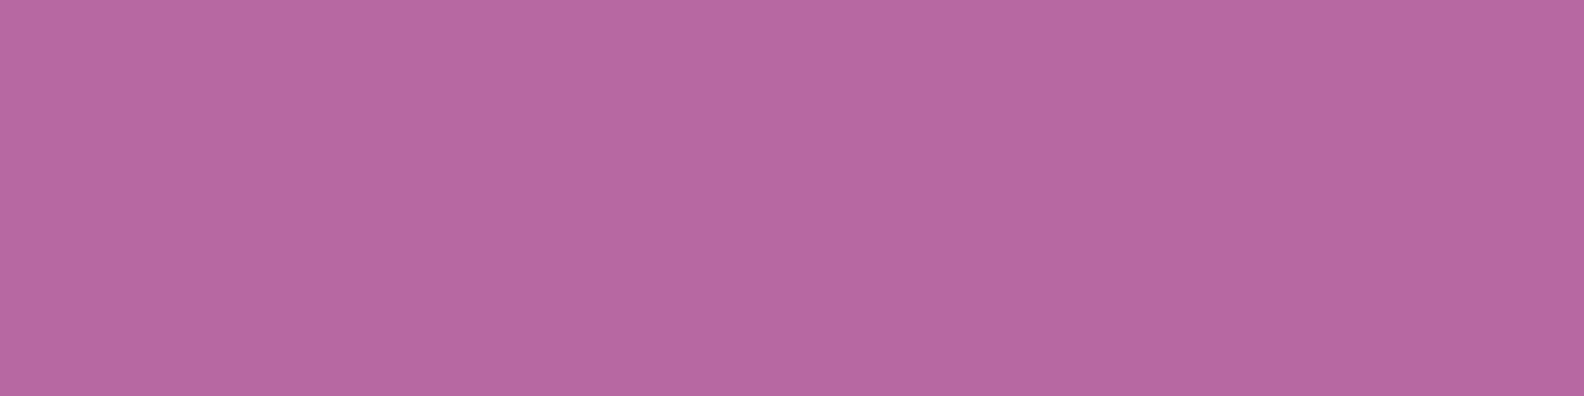 1584x396 Pearly Purple Solid Color Background